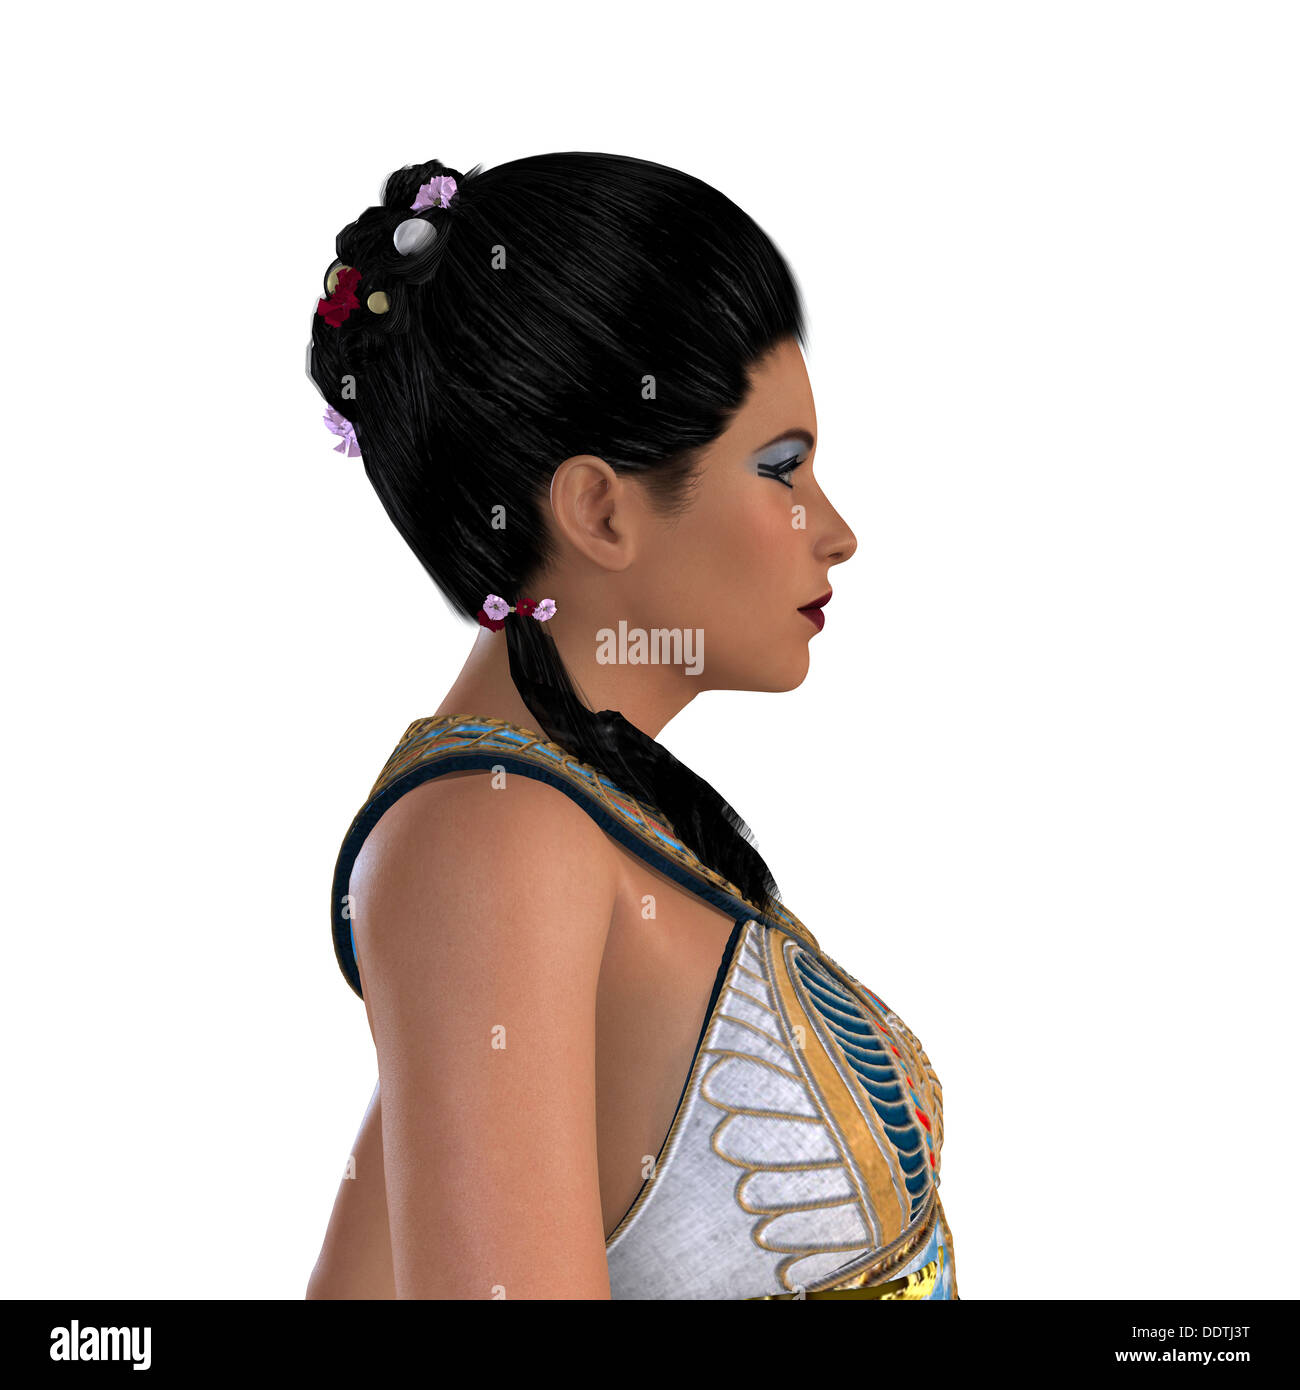 What Nefertiti A Queen Of Ancient Egypt May Have Looked Like In Life Without Her Headdress